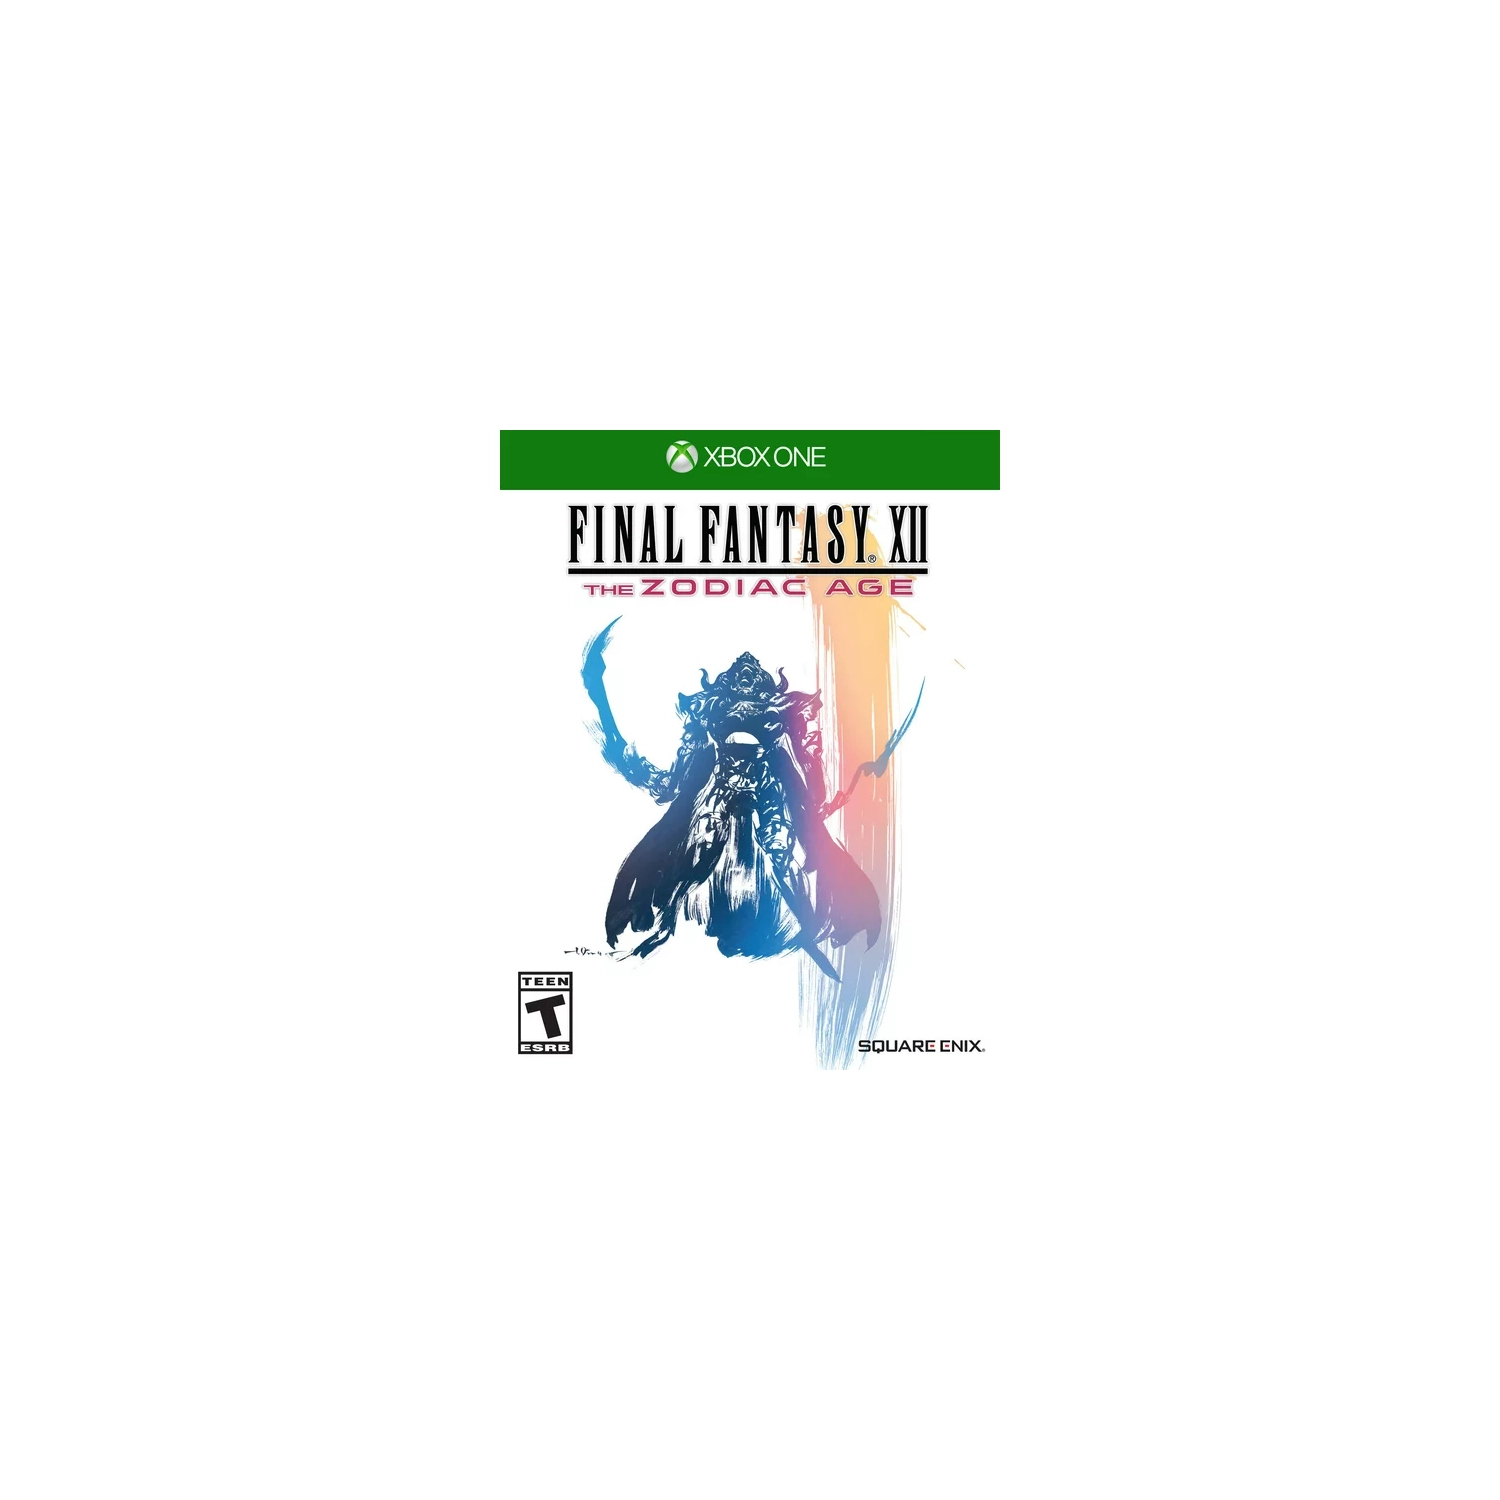 Final Fantasy XII: The Zodiac Age for Xbox One [VIDEOGAMES]